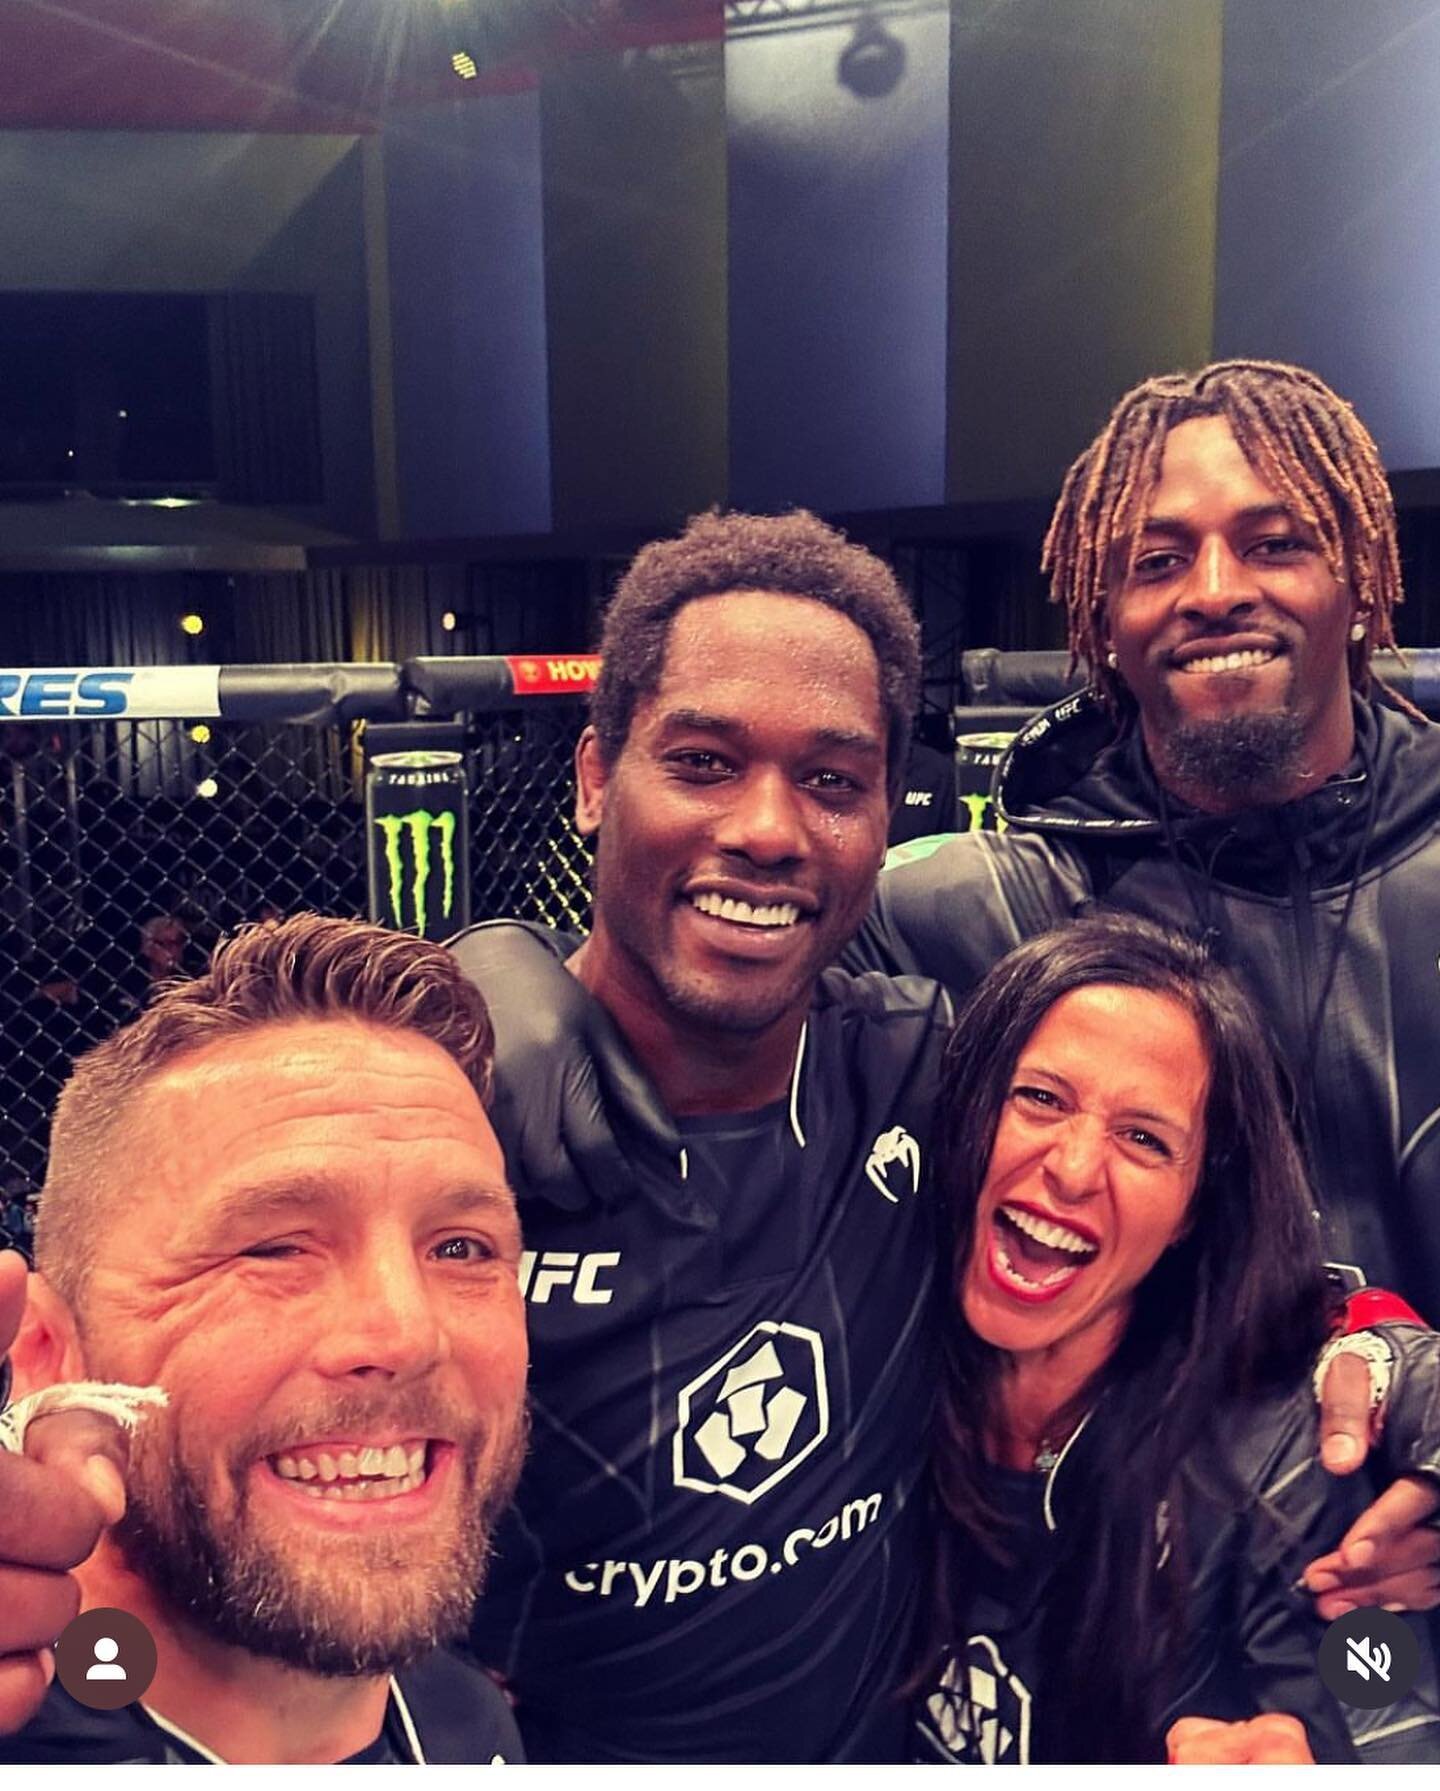 Another UFC win for @dobsonufc.  An incredible performance of style, strategy and heart.  My eyes filled with tears of joy as they raised his hand in victory.  It was a pleasure to train him and corner him along side @wolverinestevensmma, @strongstyl